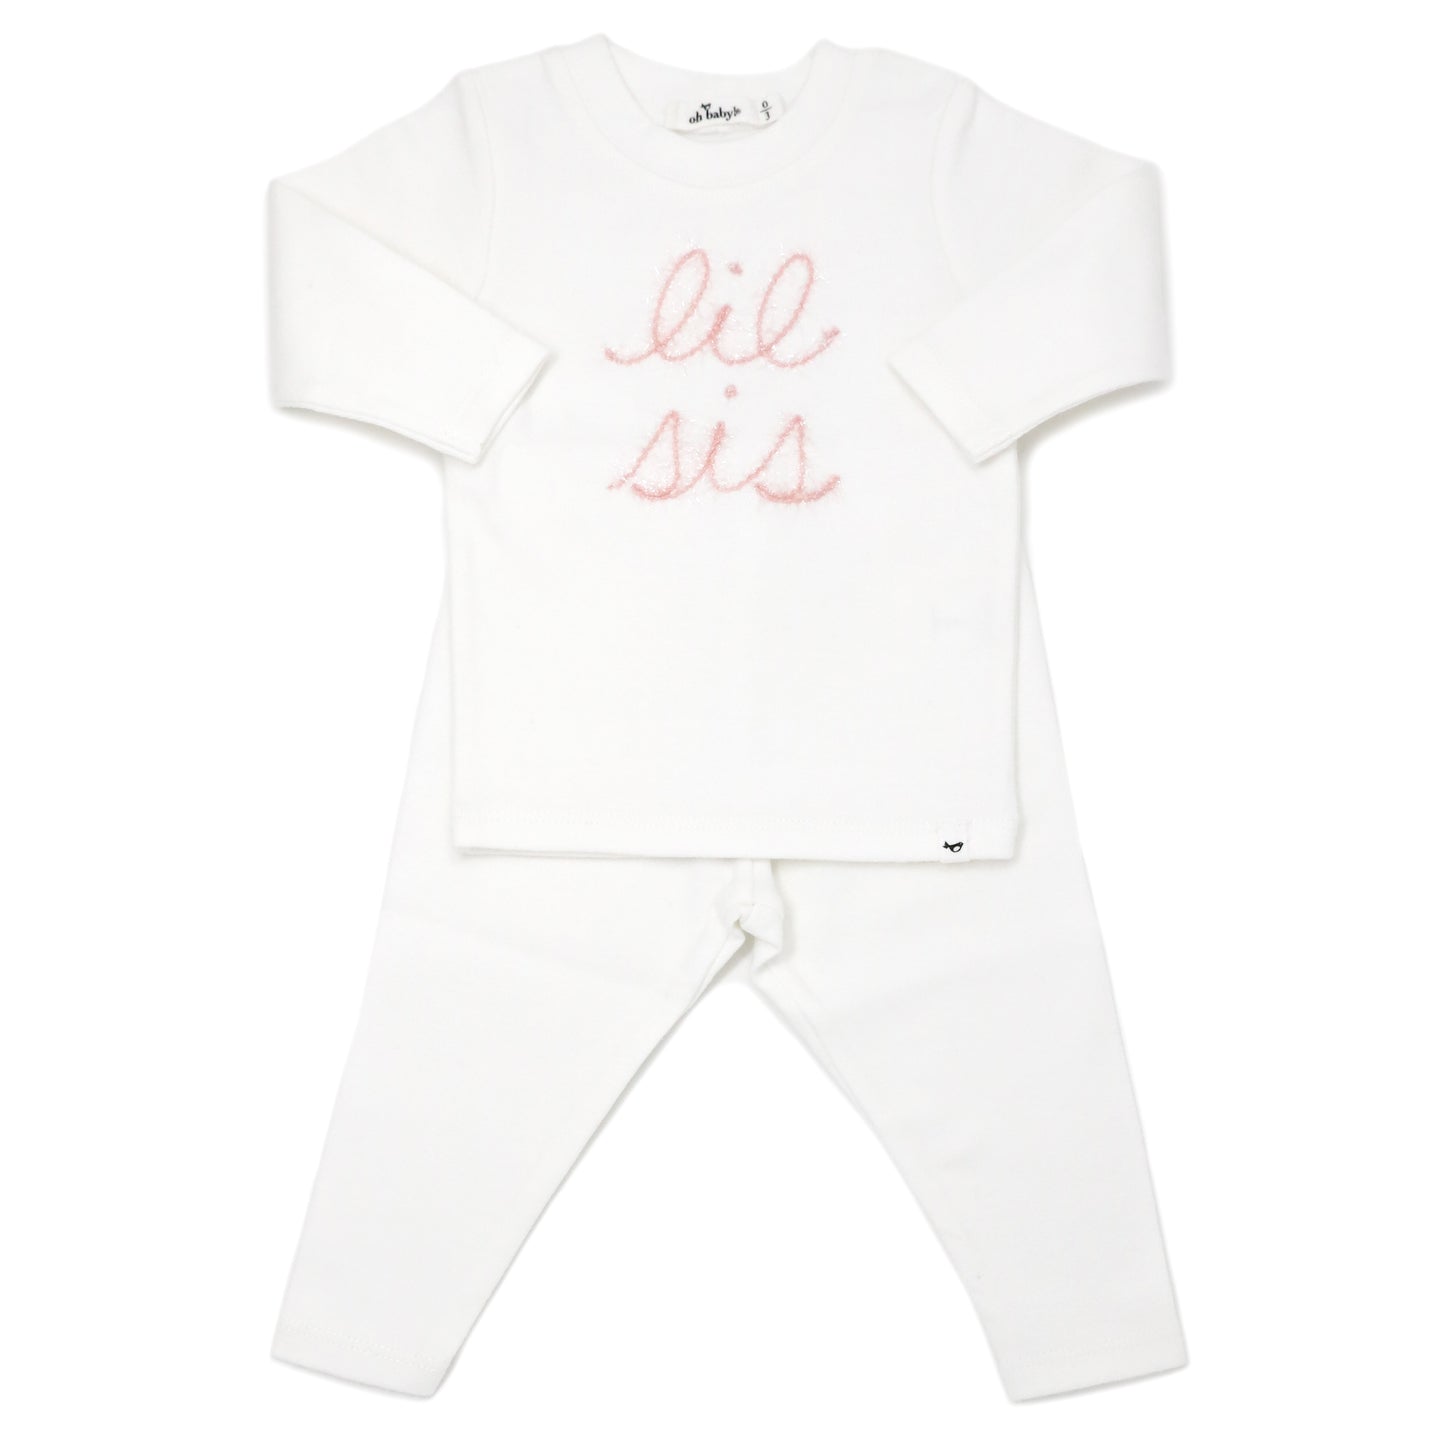 "lil sis" Pink Sparkle Embroidered 2PC Set